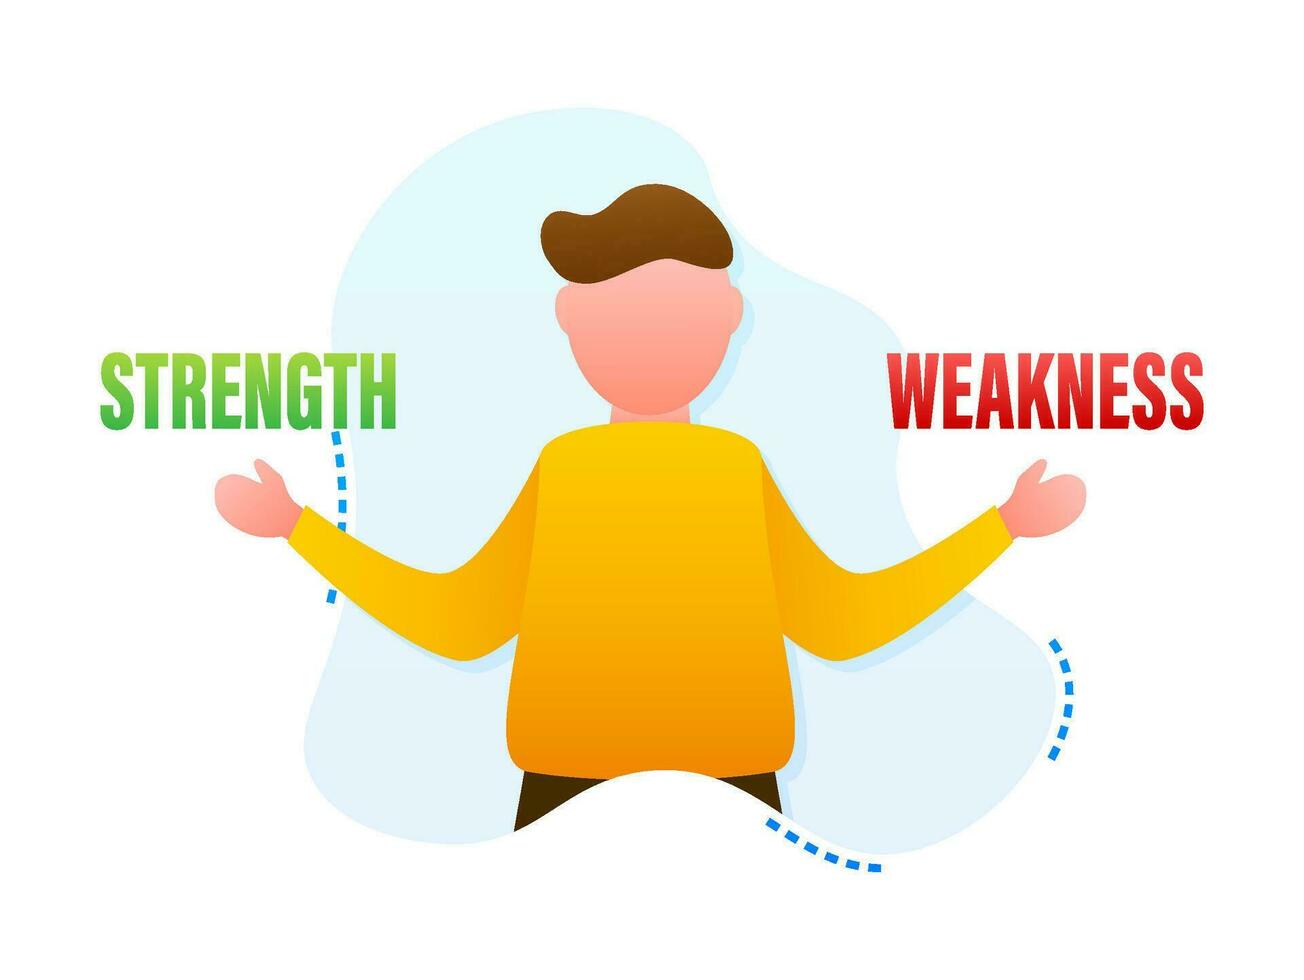 Personal Strengths and Weaknesses Concept, Vector Illustration of a Man Balancing Both Sides for Self Development and Growth